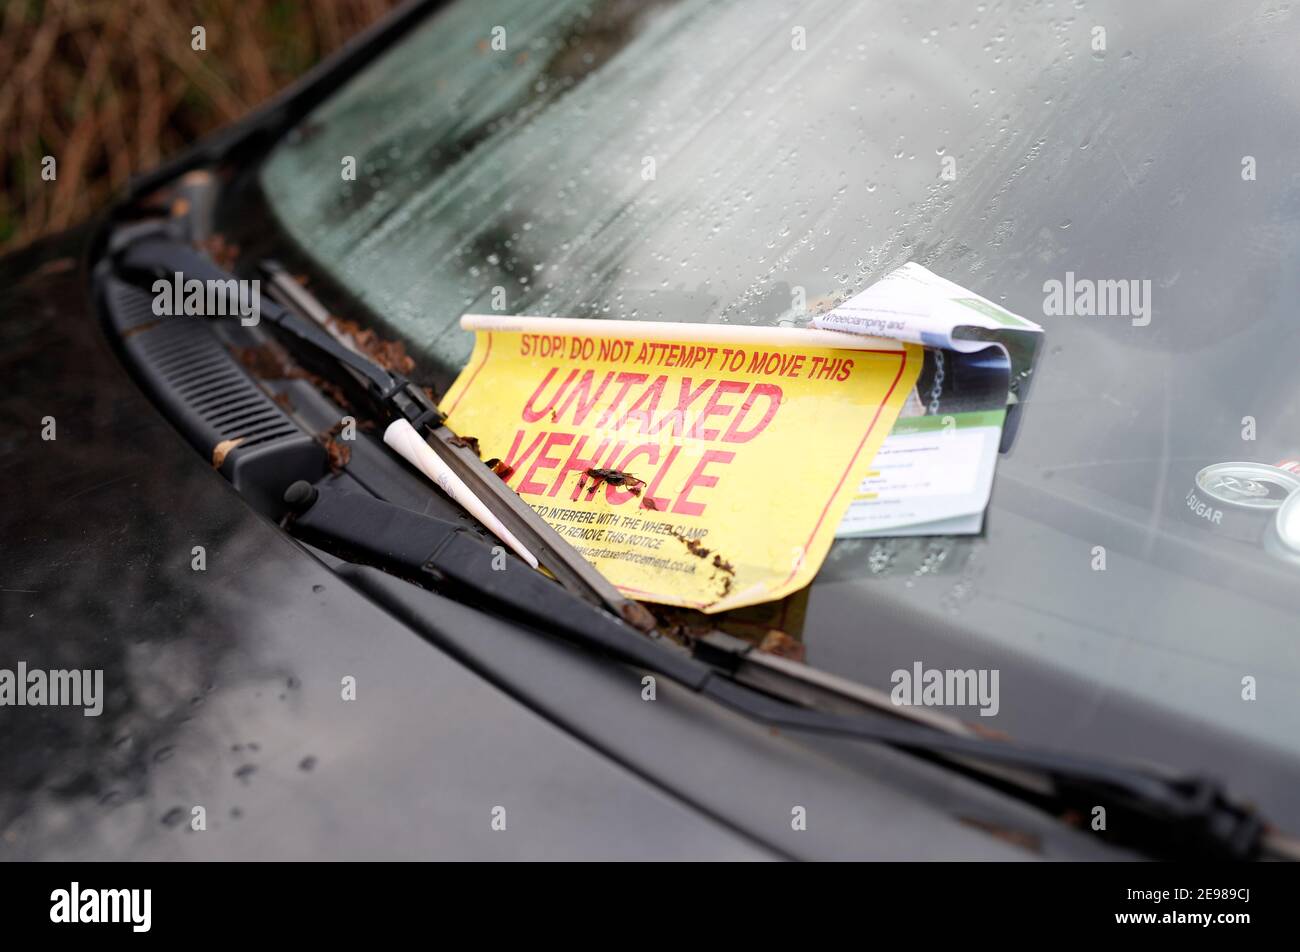 Loughborough, Leicestershire, UK. 3rd February 2021. A warning sticker peels from a Fiat Punto car immobilised by a DVLA clamp for having no road tax. Stock Photo